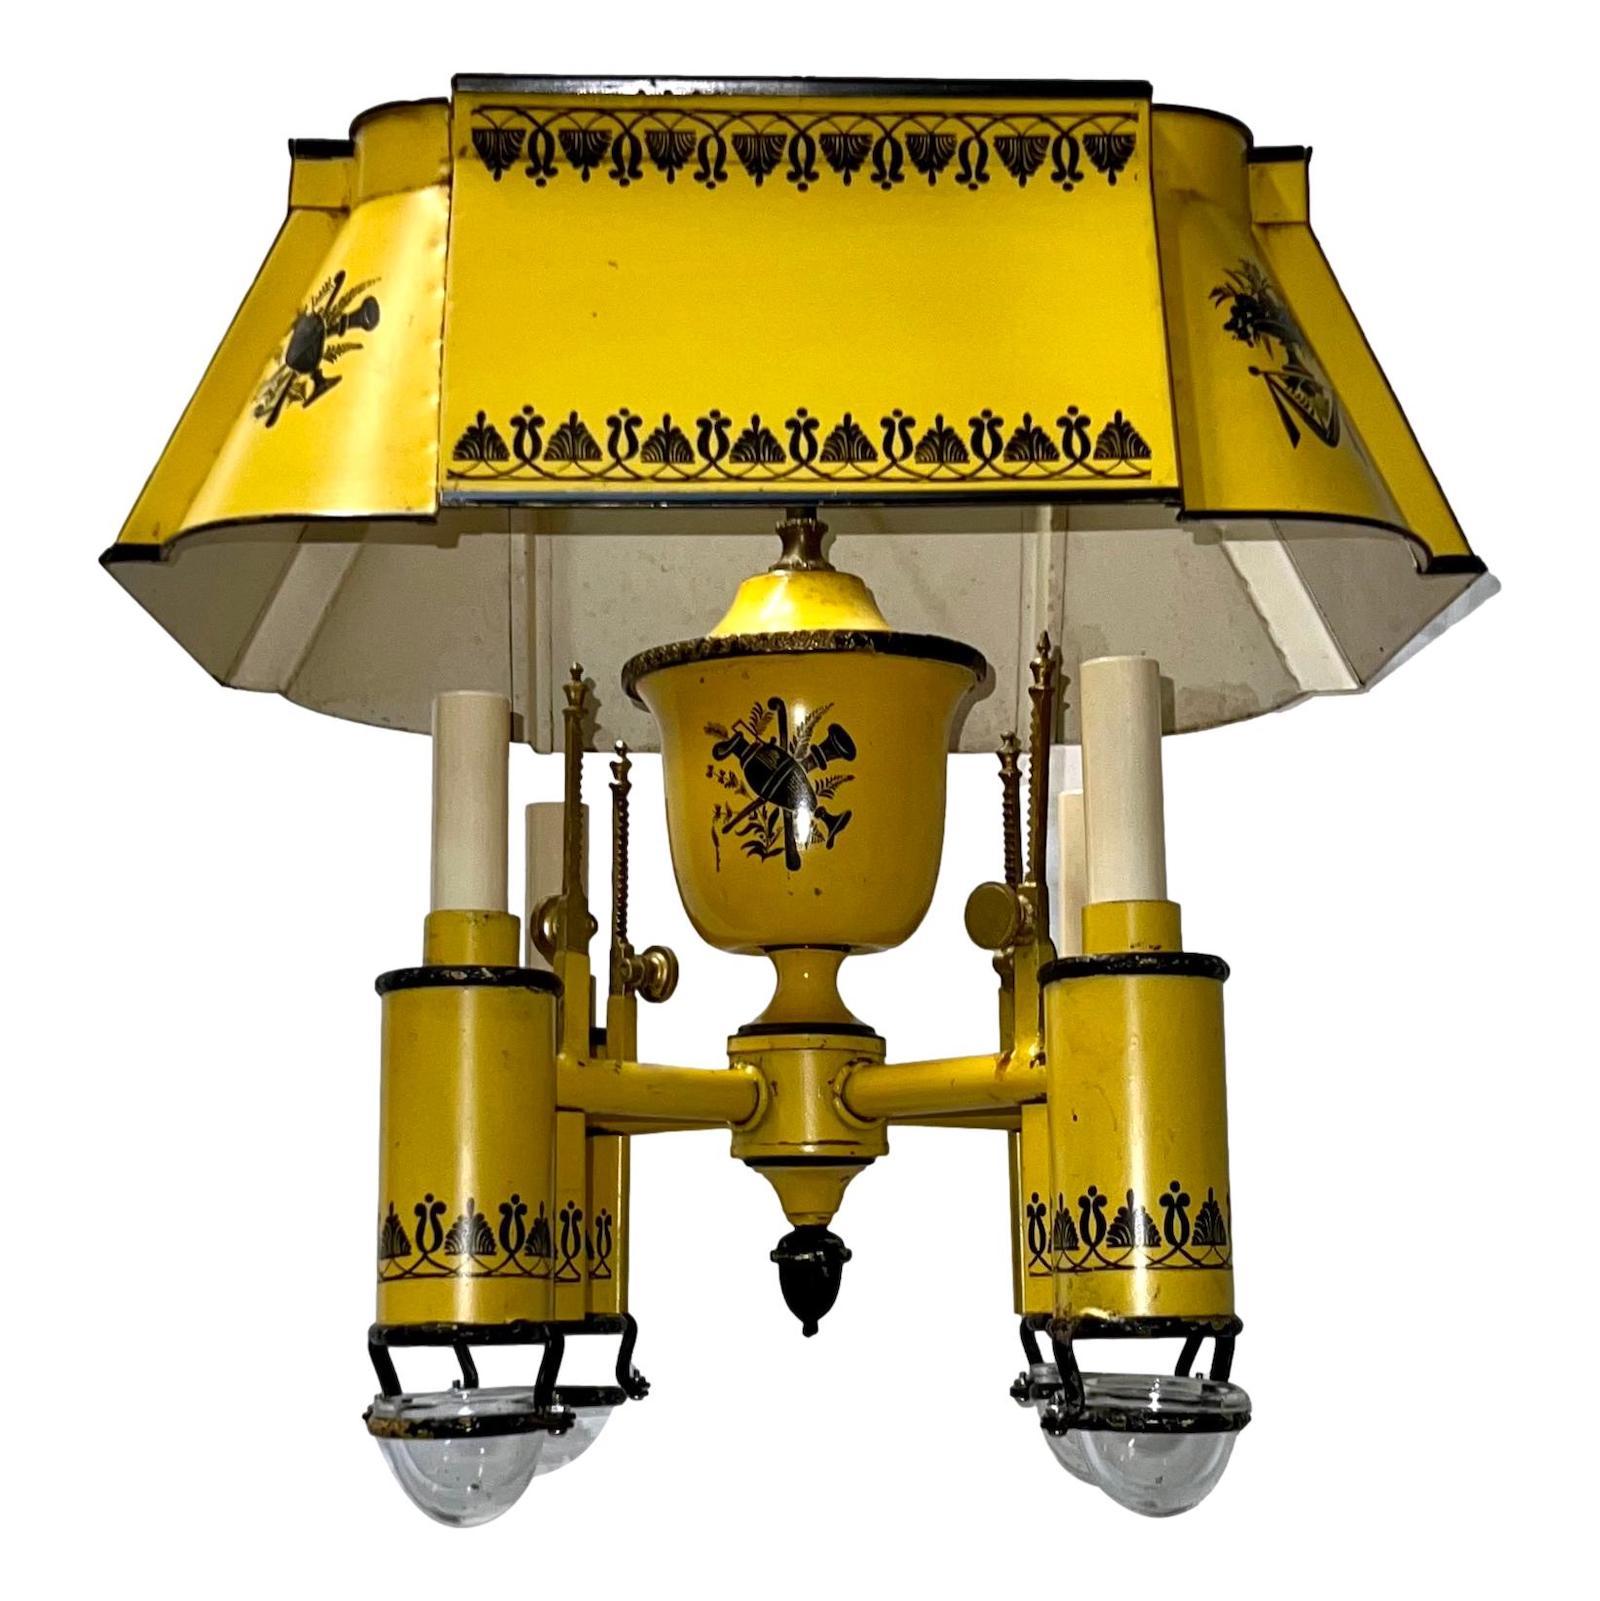 A circa 1950's French tole chandelier with painted decoration

Measurements:
Height of body: 26